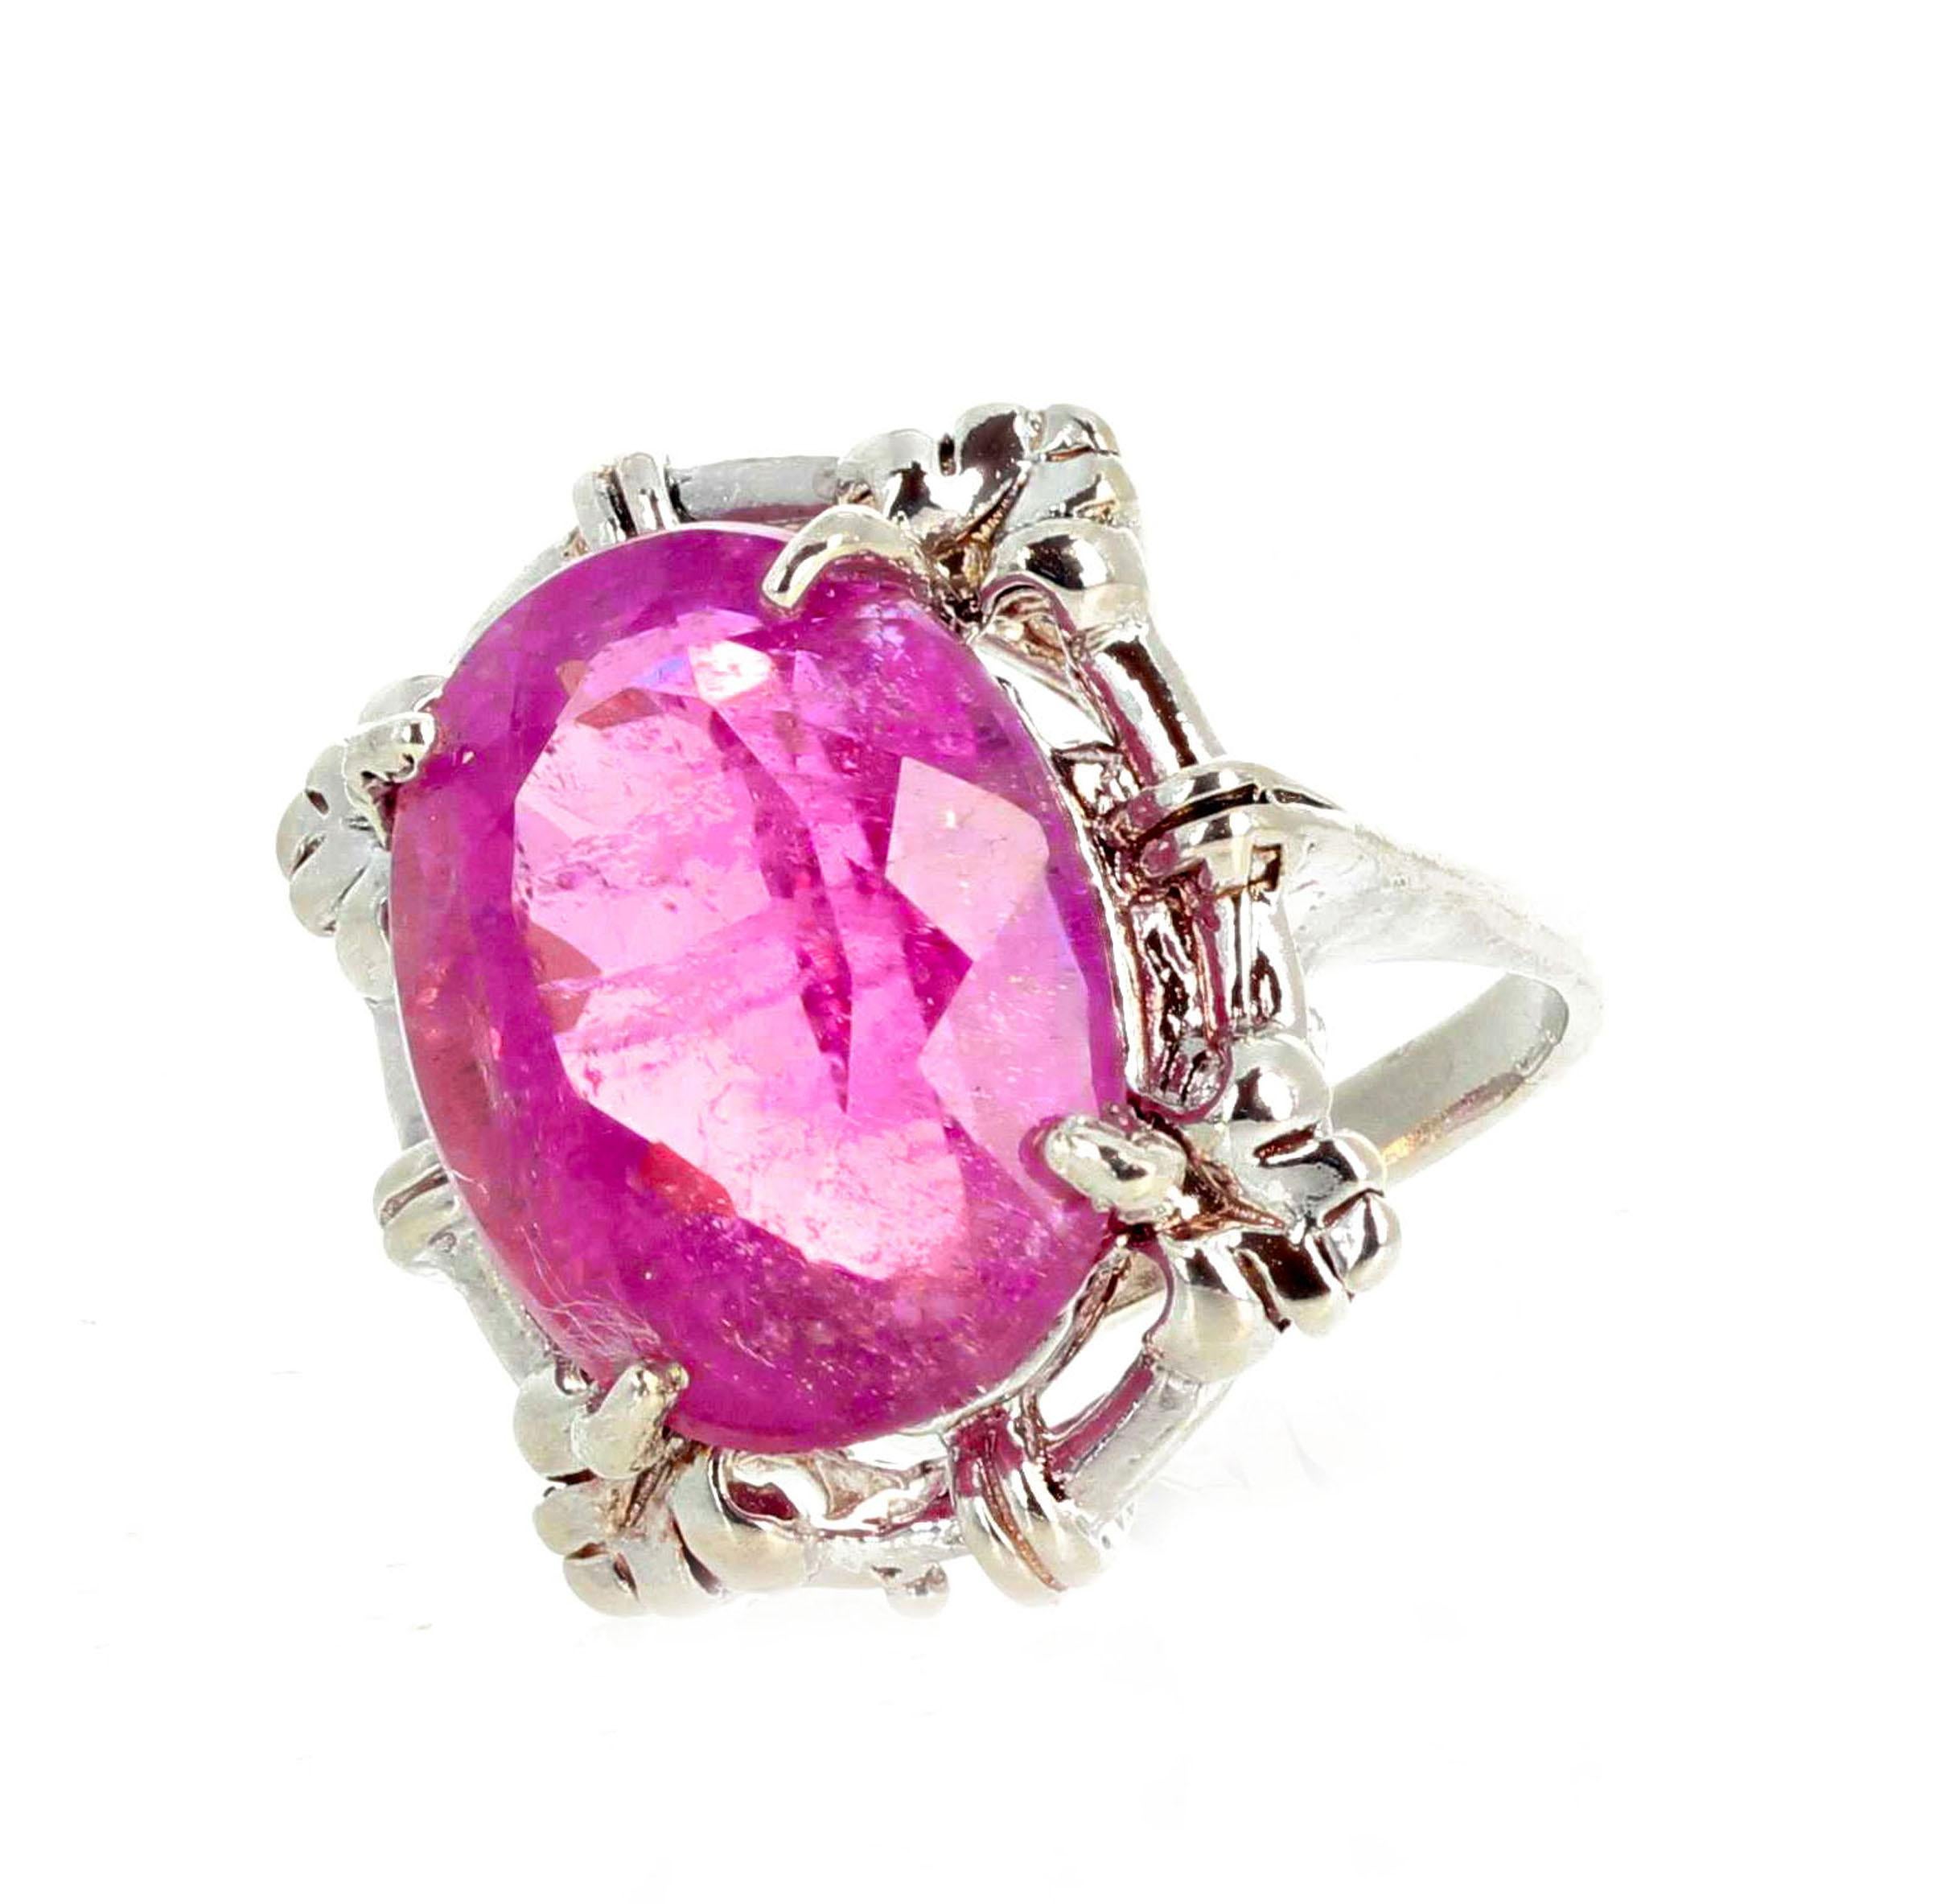 This gorgeous large natural brilliant translucent pinky purple Kunzite - 17.2mm x 13.2mm = 11.6 carats - is set in a beautiful sterling silver ring sizable 7.25.  Spectacular optical effects in the Kunzite exhibits pink reflections and fire